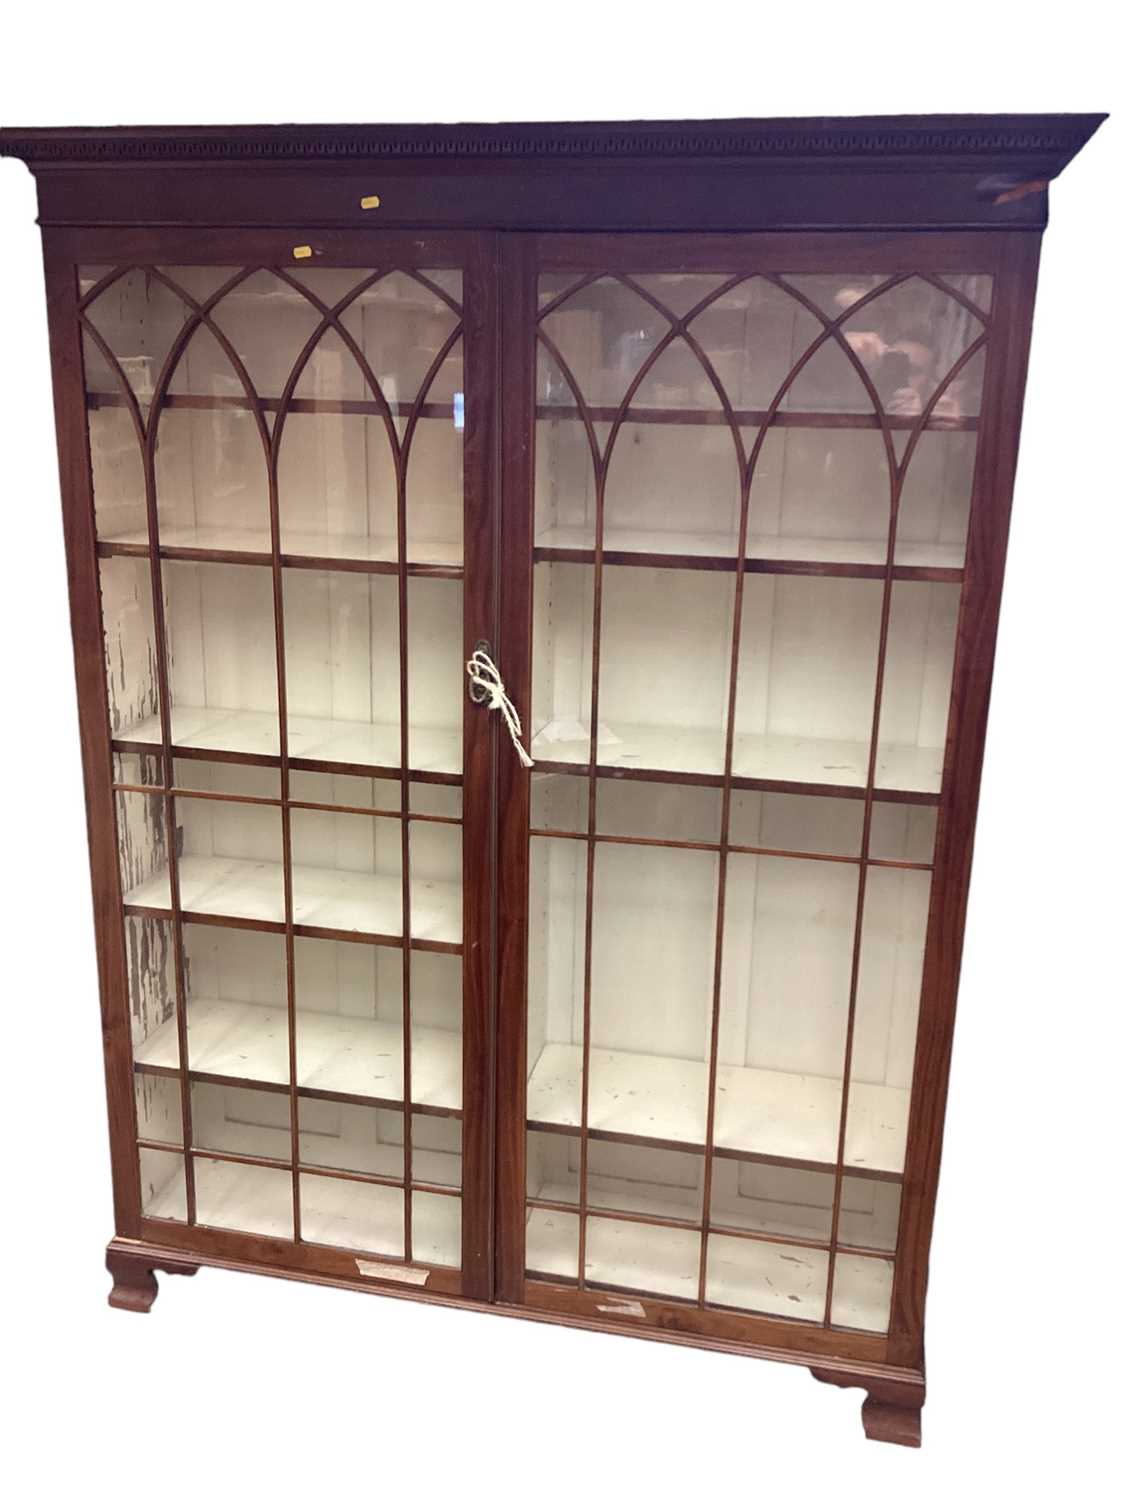 Large mahogany display cabinet enclosed by two glazed doors.